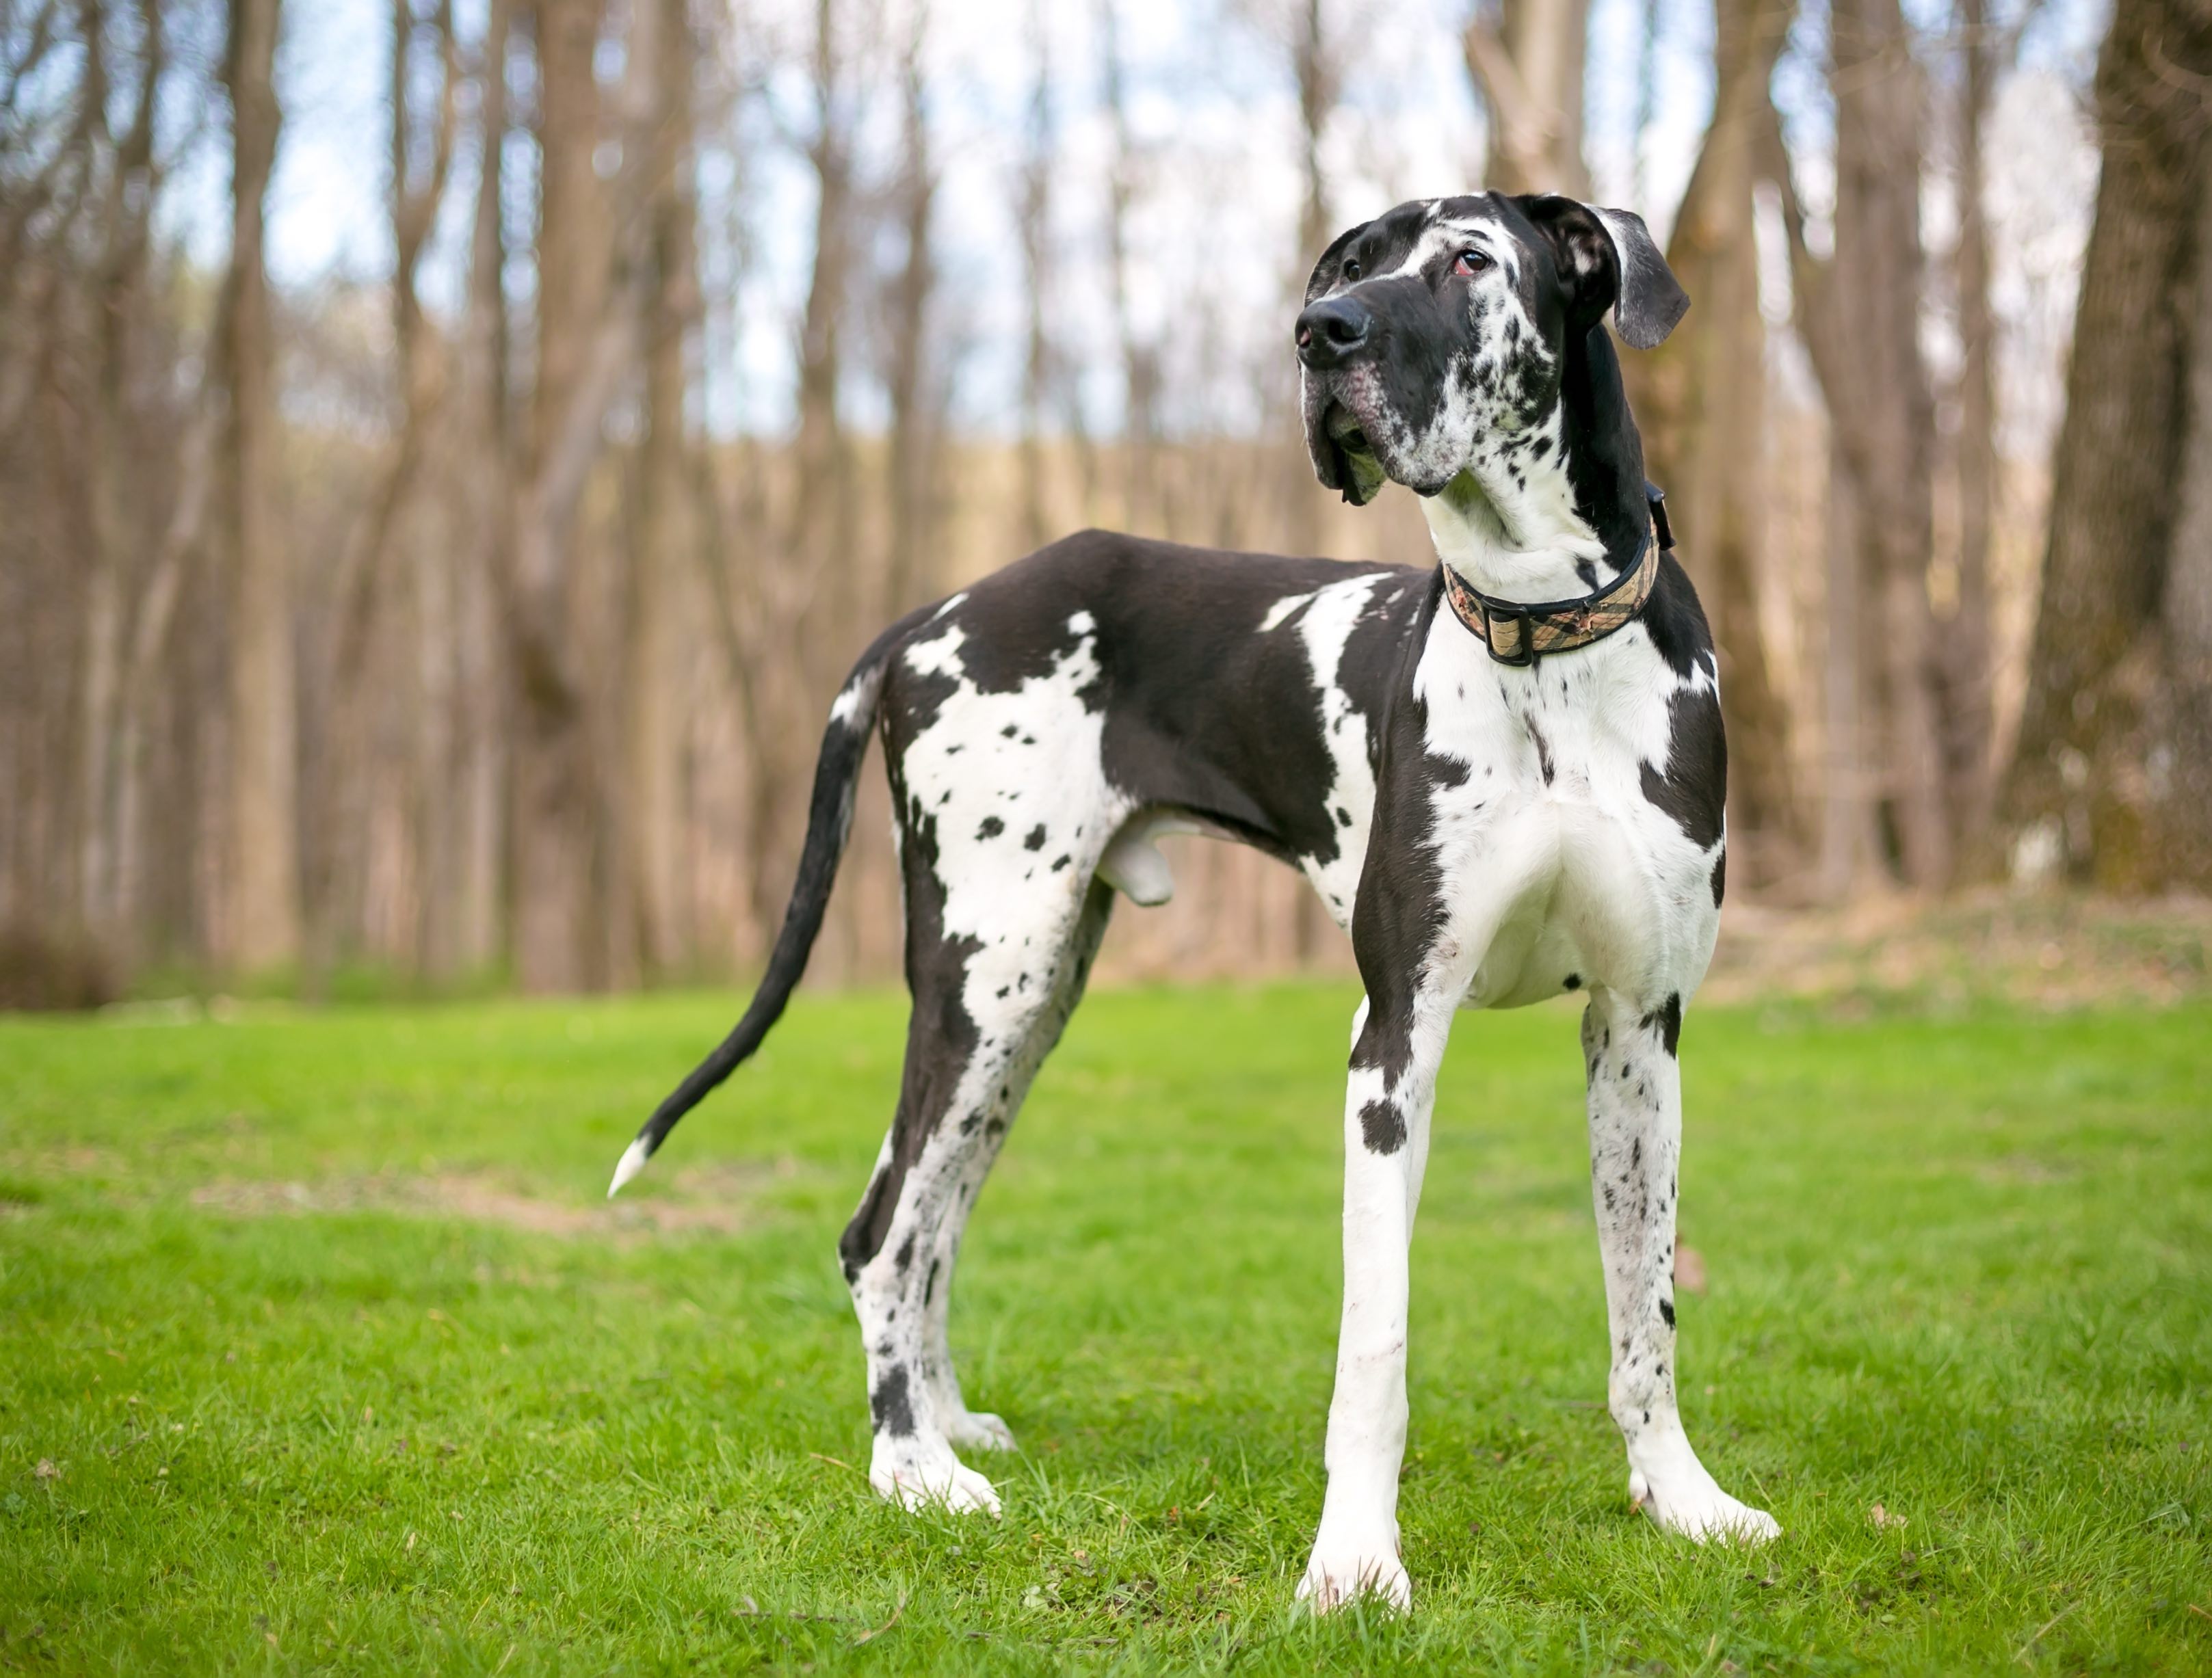 black and white spotted great dane standing tall